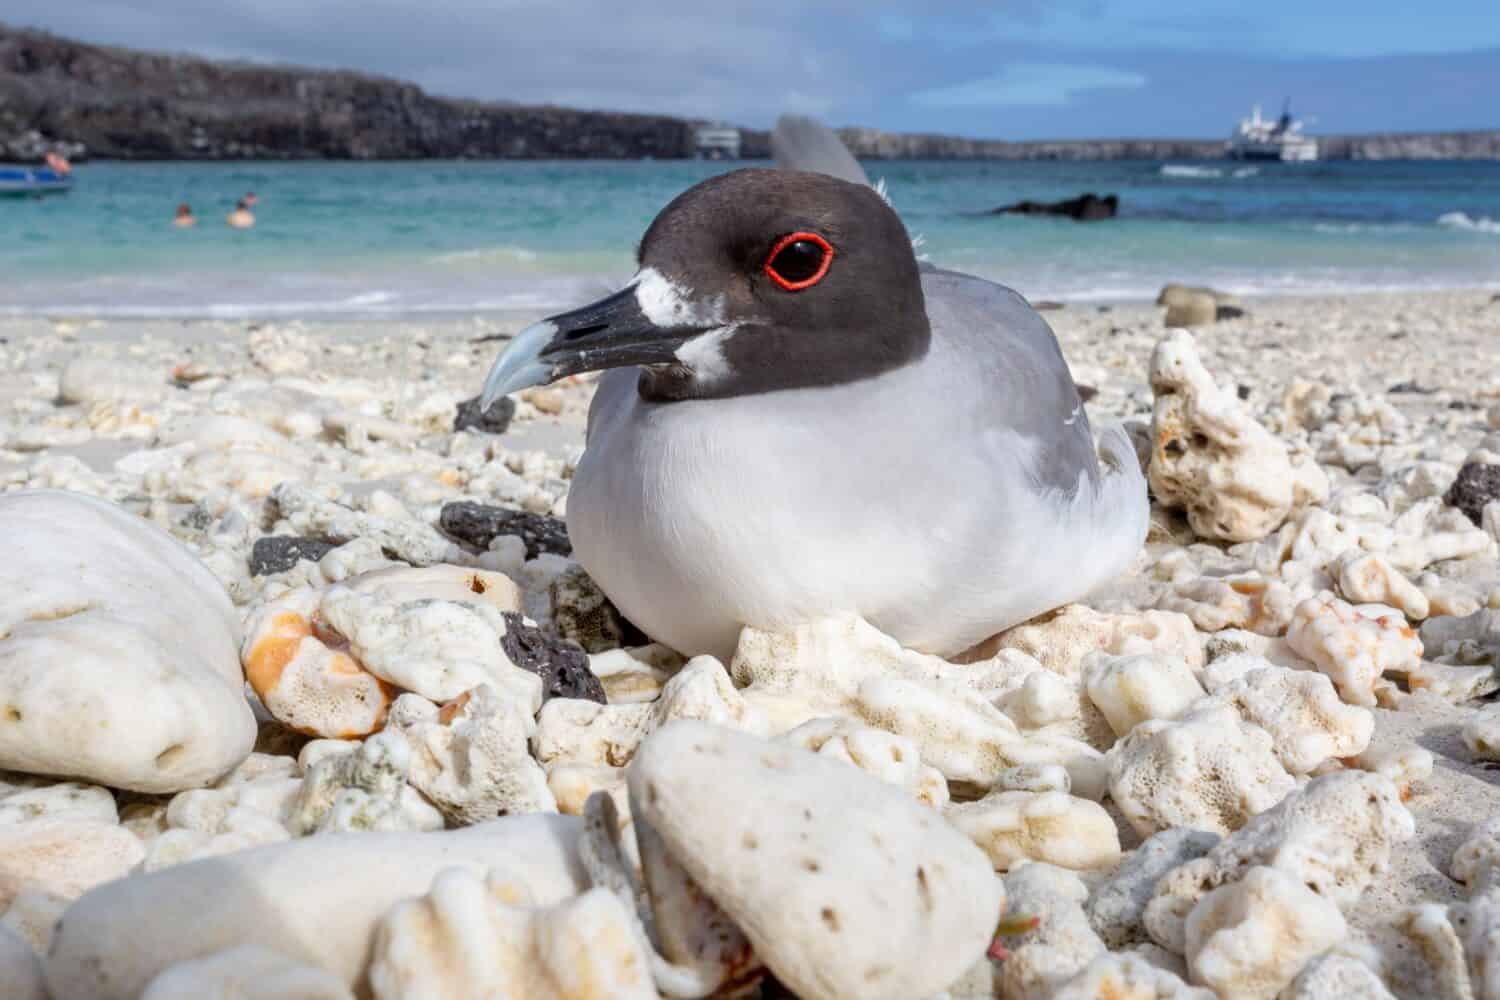 An adult swallow-tailed gull rests on the coral beach of Isla Genovesa. The water in the background is surrounded by the rim of a dormant volcano cone, and is a popular spot for visiting tourists.